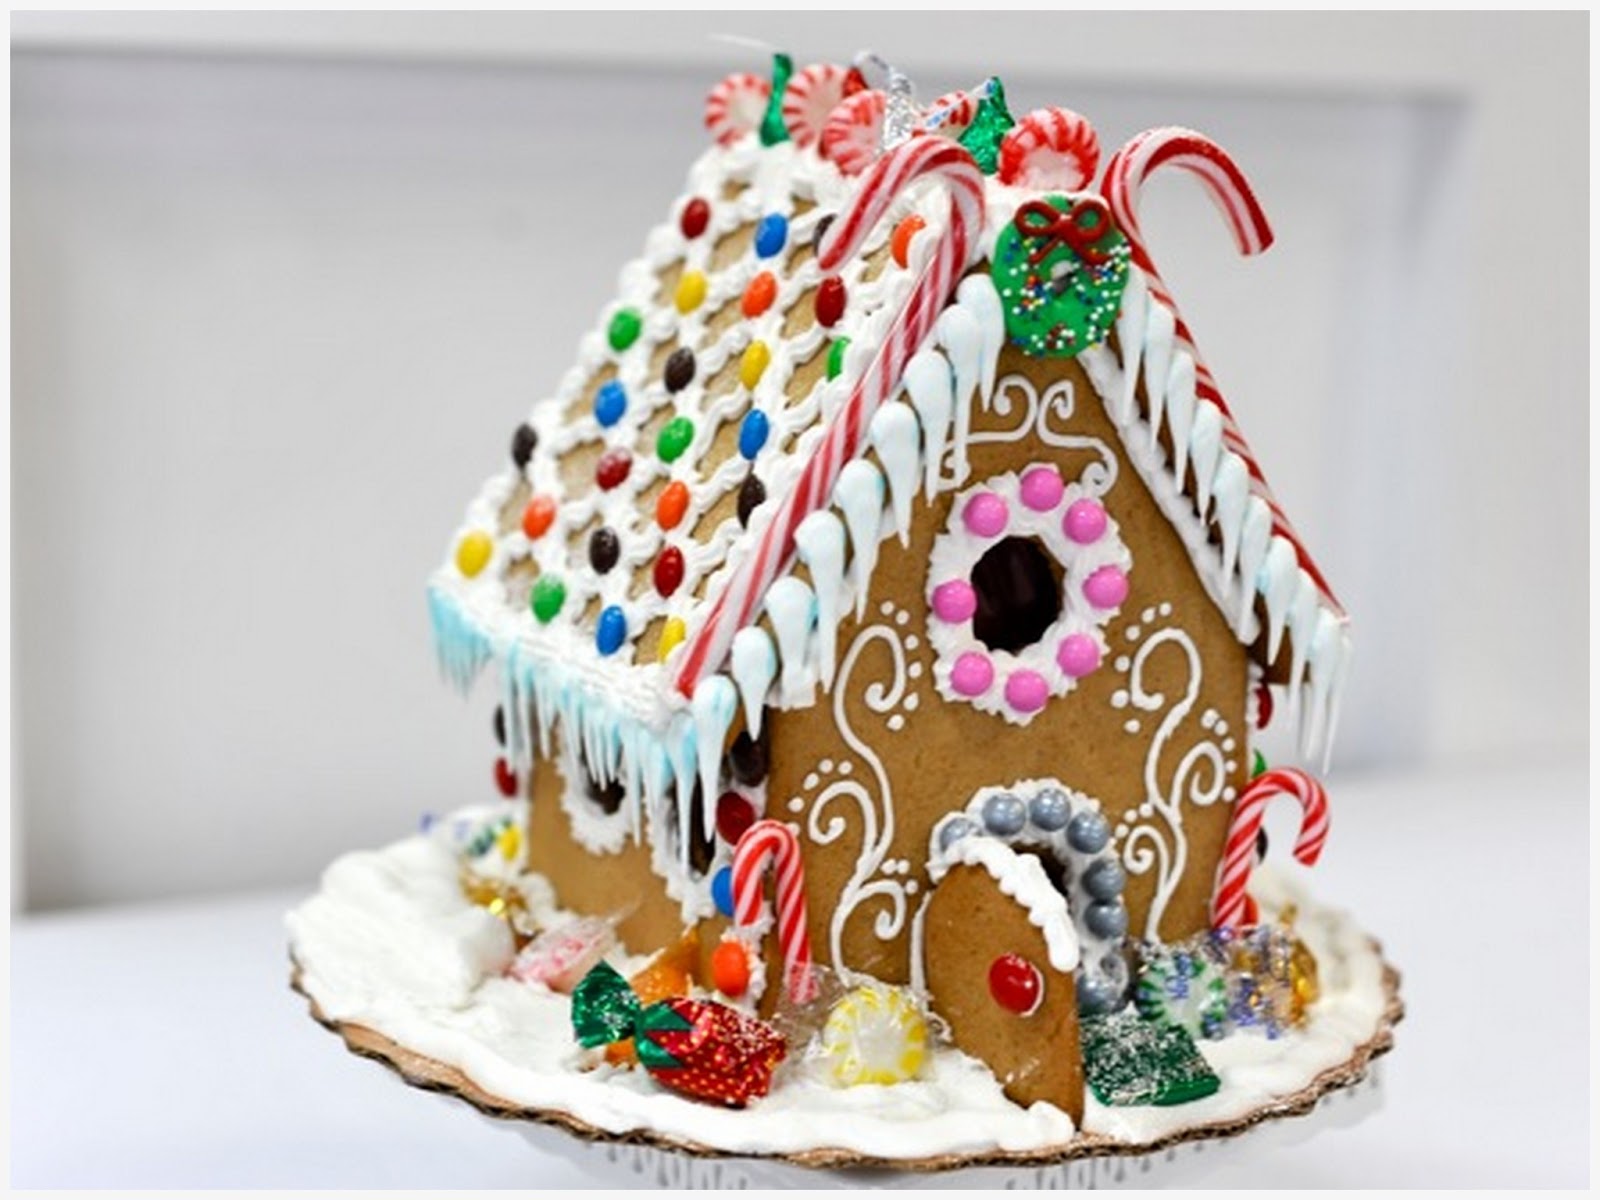 Production Diary Week 2 Gingerbread House Ideas Final Major Project